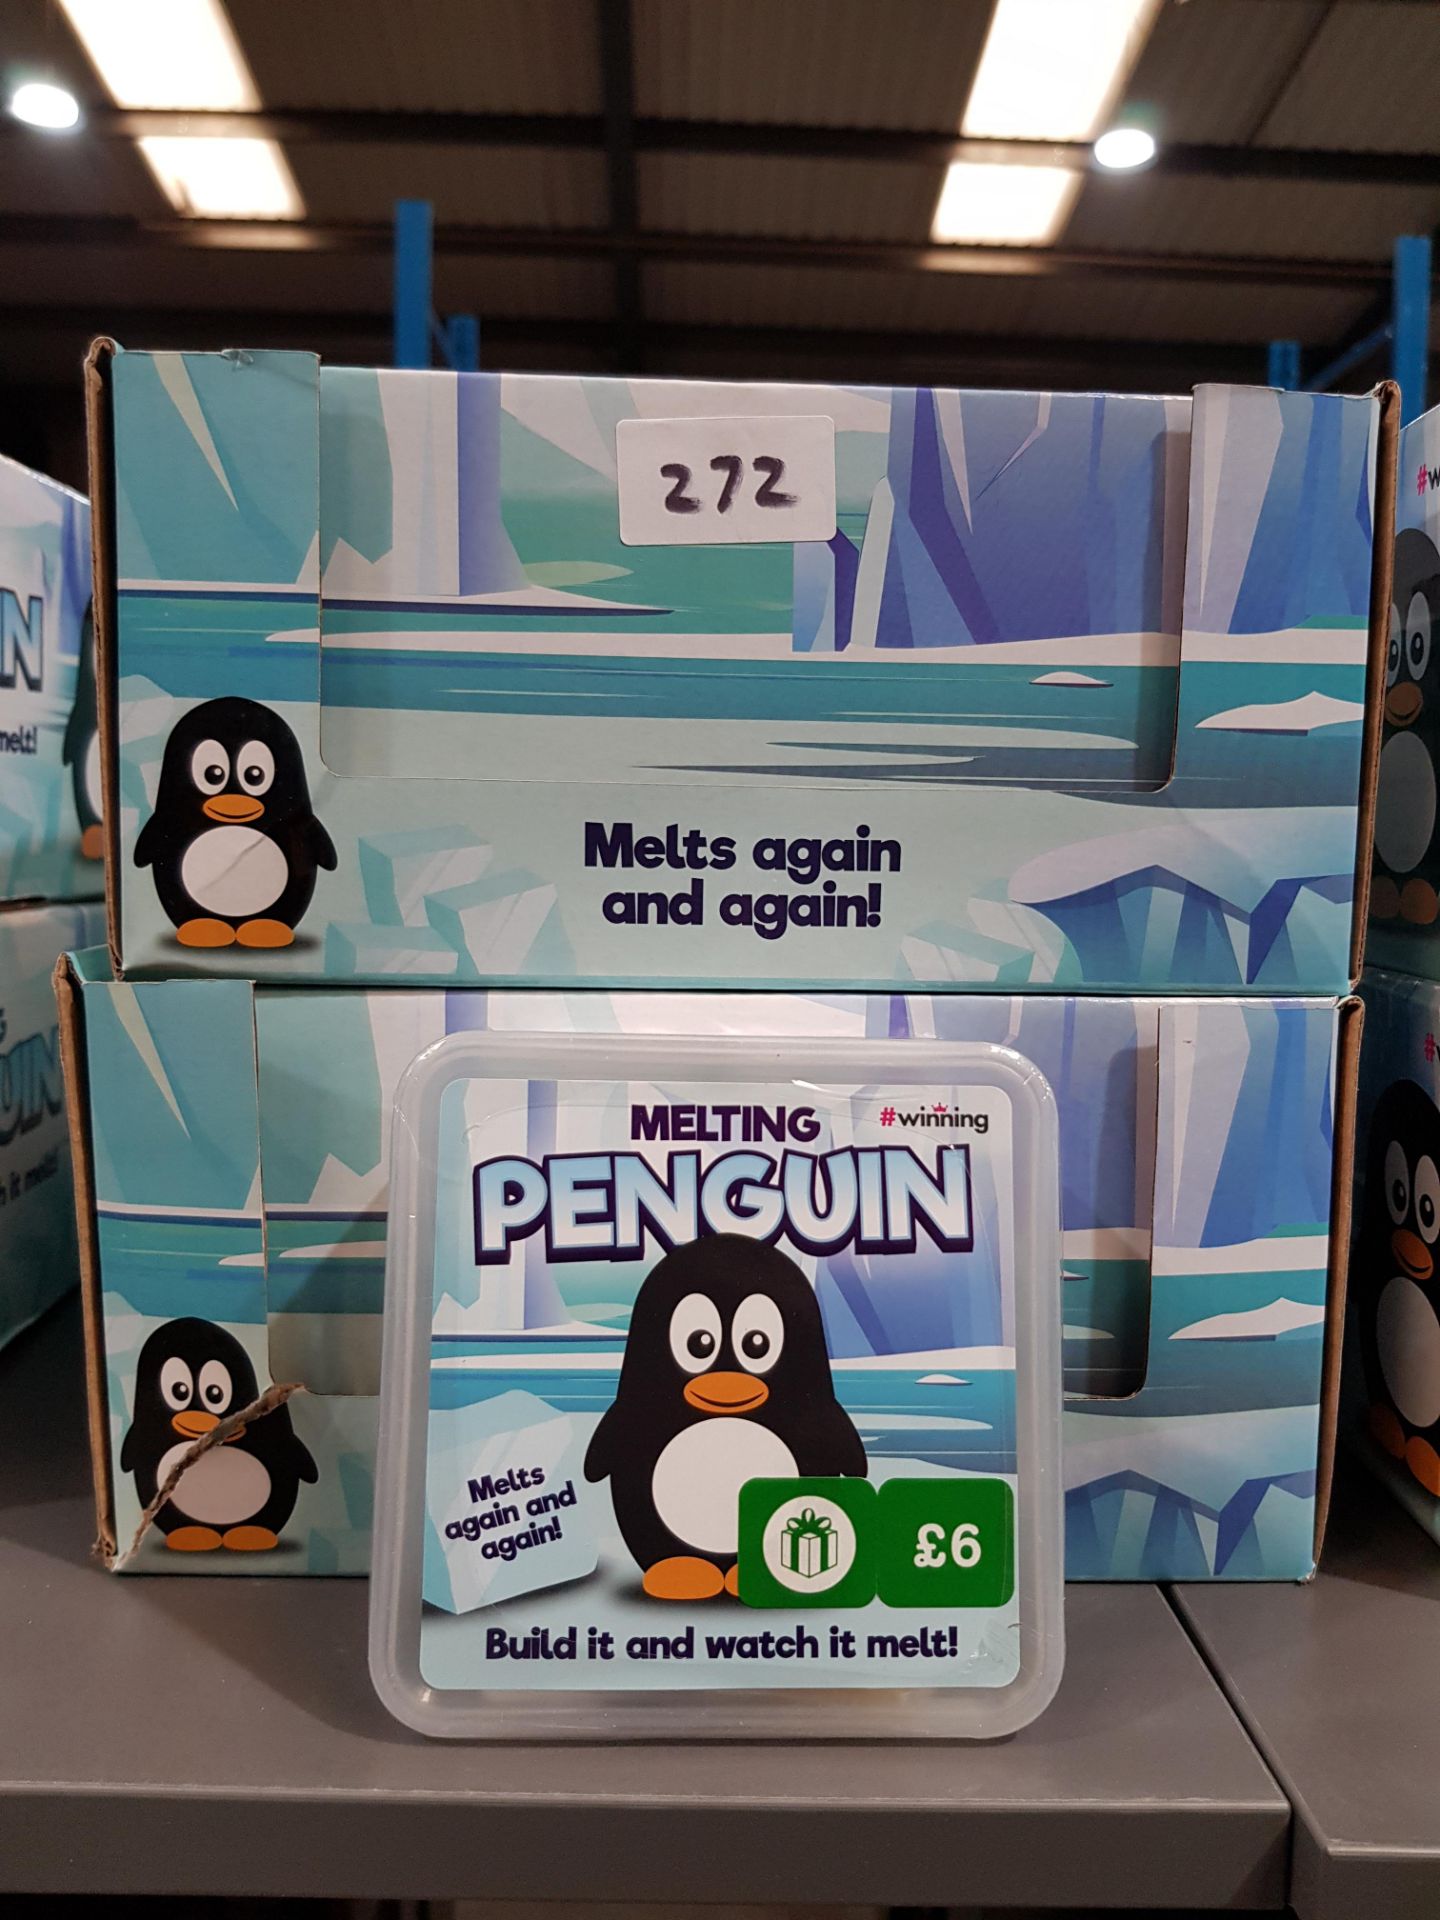 COMBINED RRP £ 72 - 24 X #WINNING MELTING PENGUIN (SEALED / AS NEW)